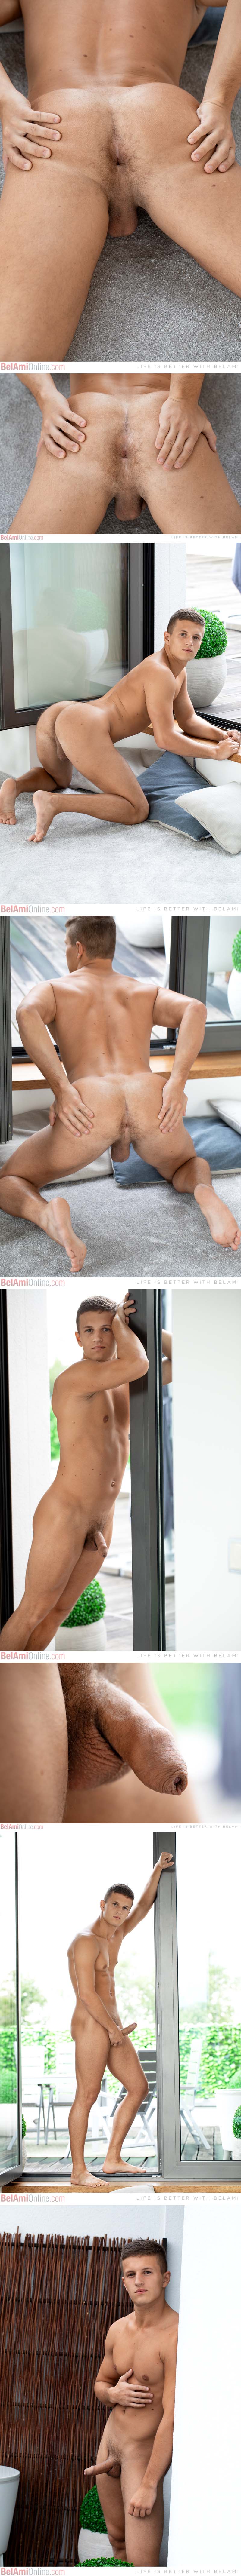 Karl Ayers [Model of the Week] at BelAmiOnline